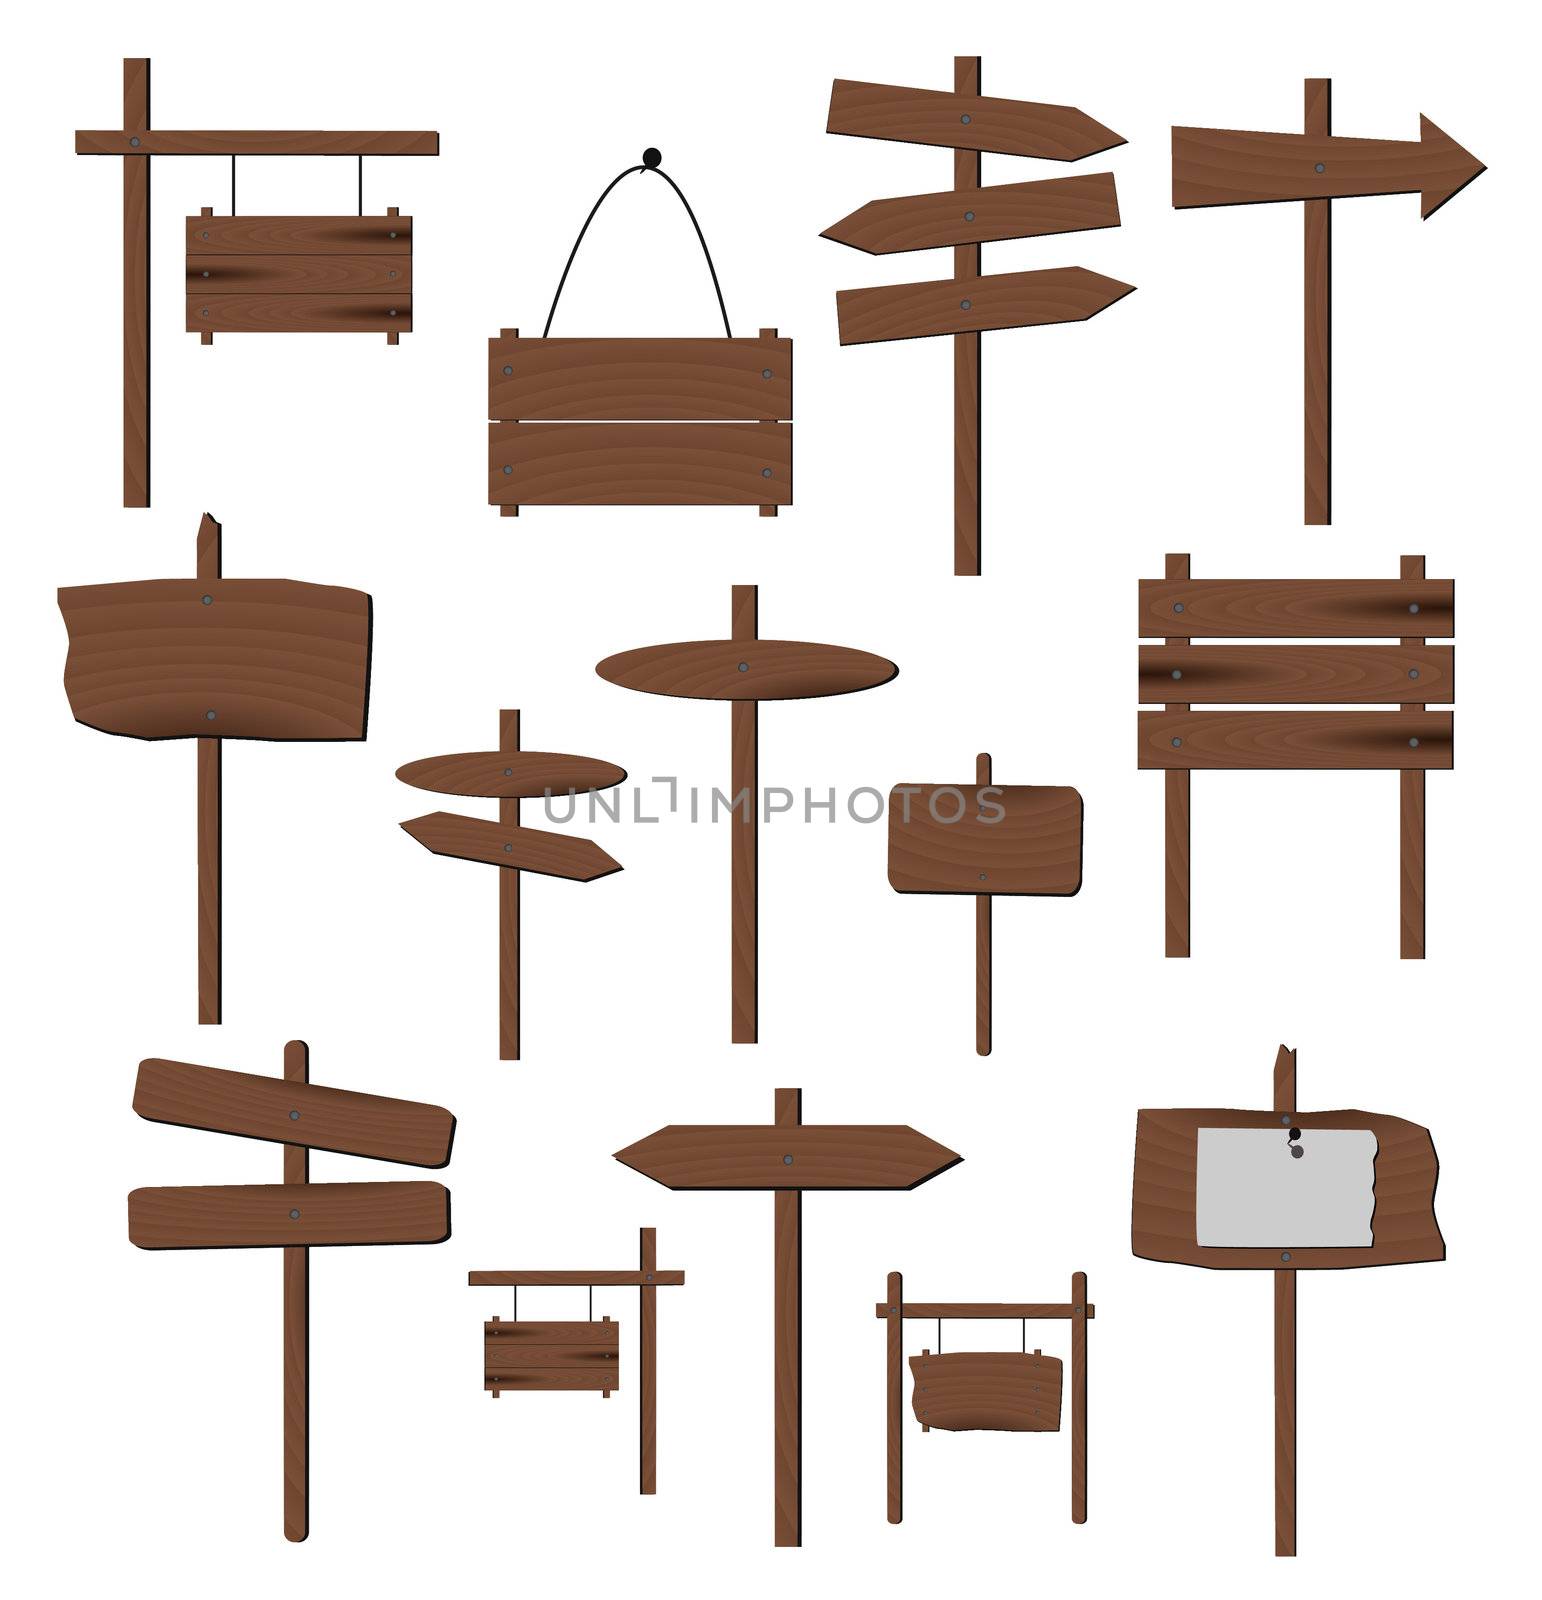 Image of various wooden signs isolated on a white background.